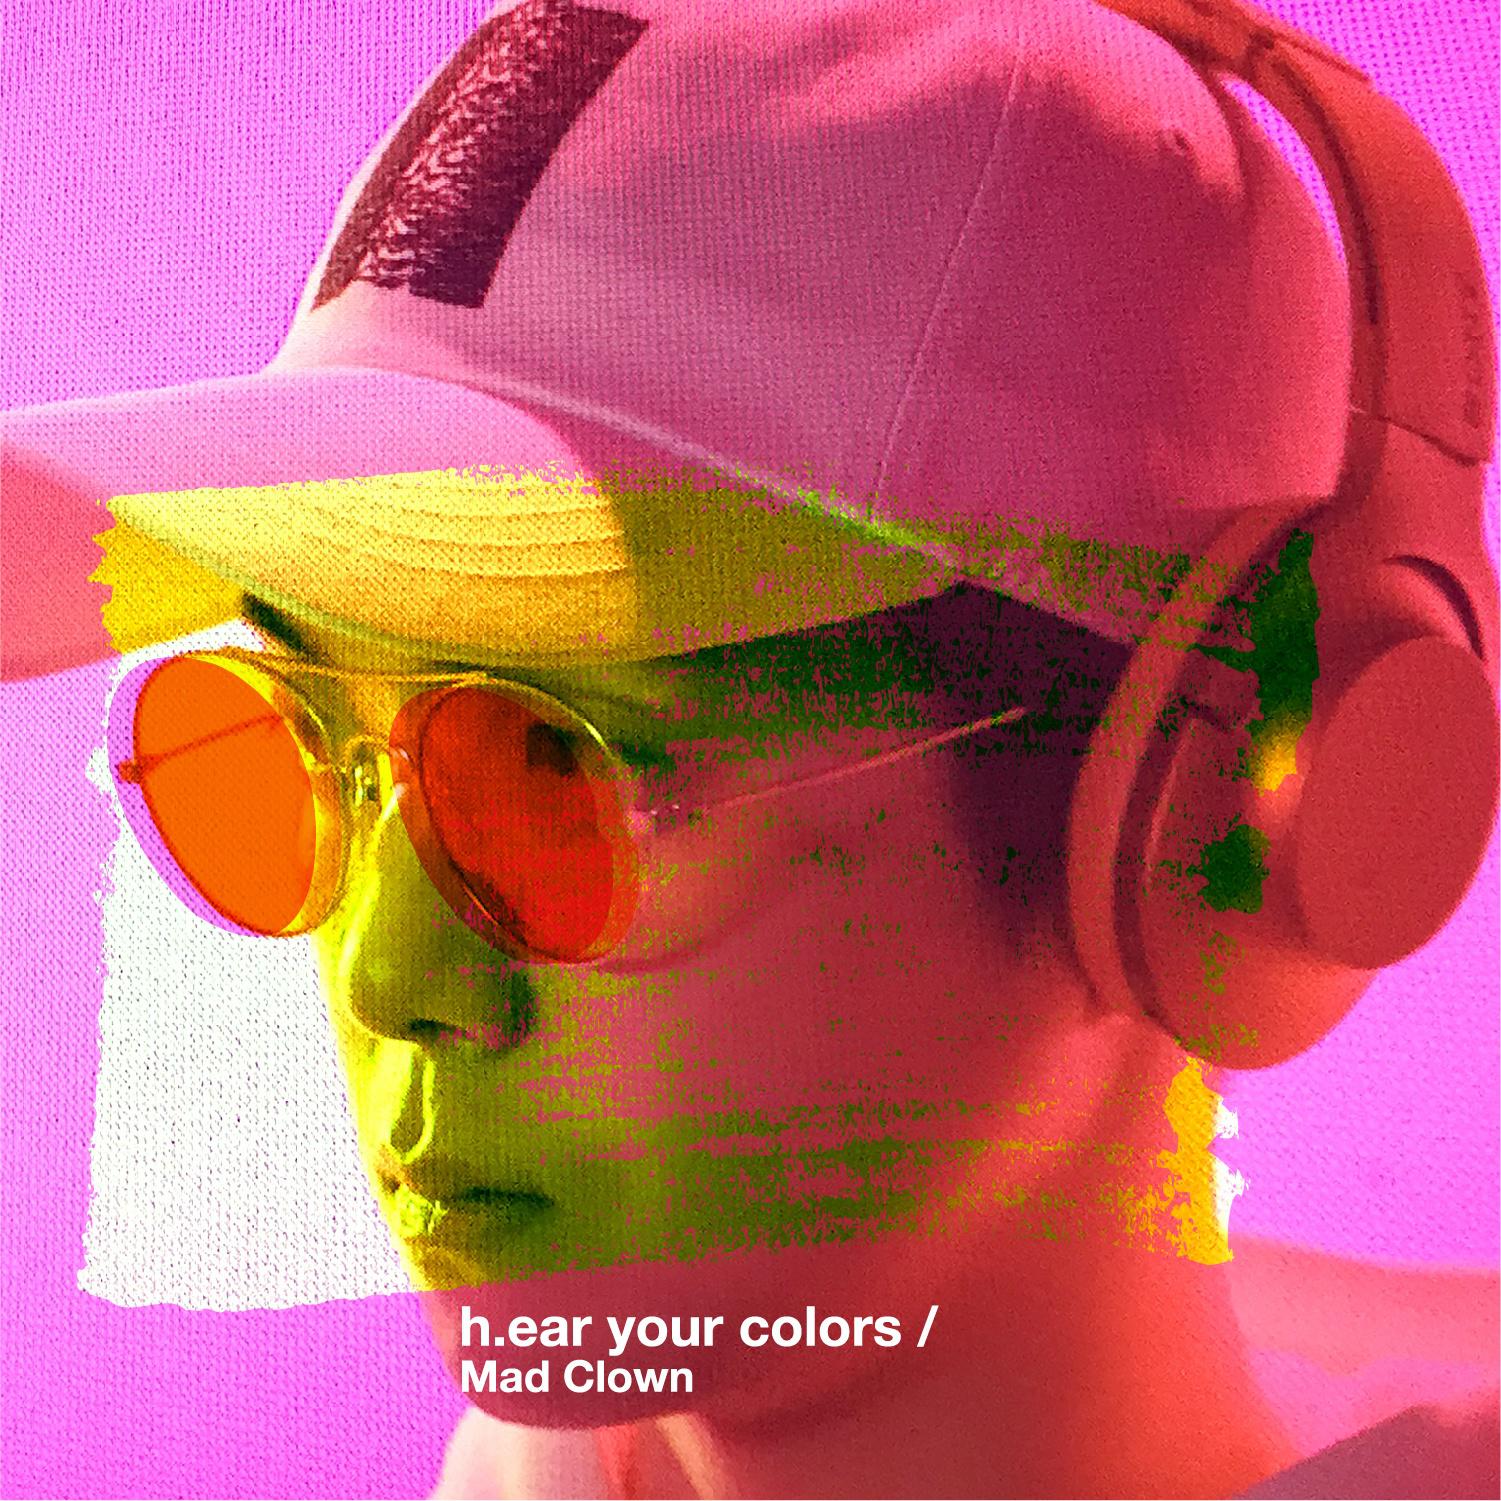 h. ear your colors